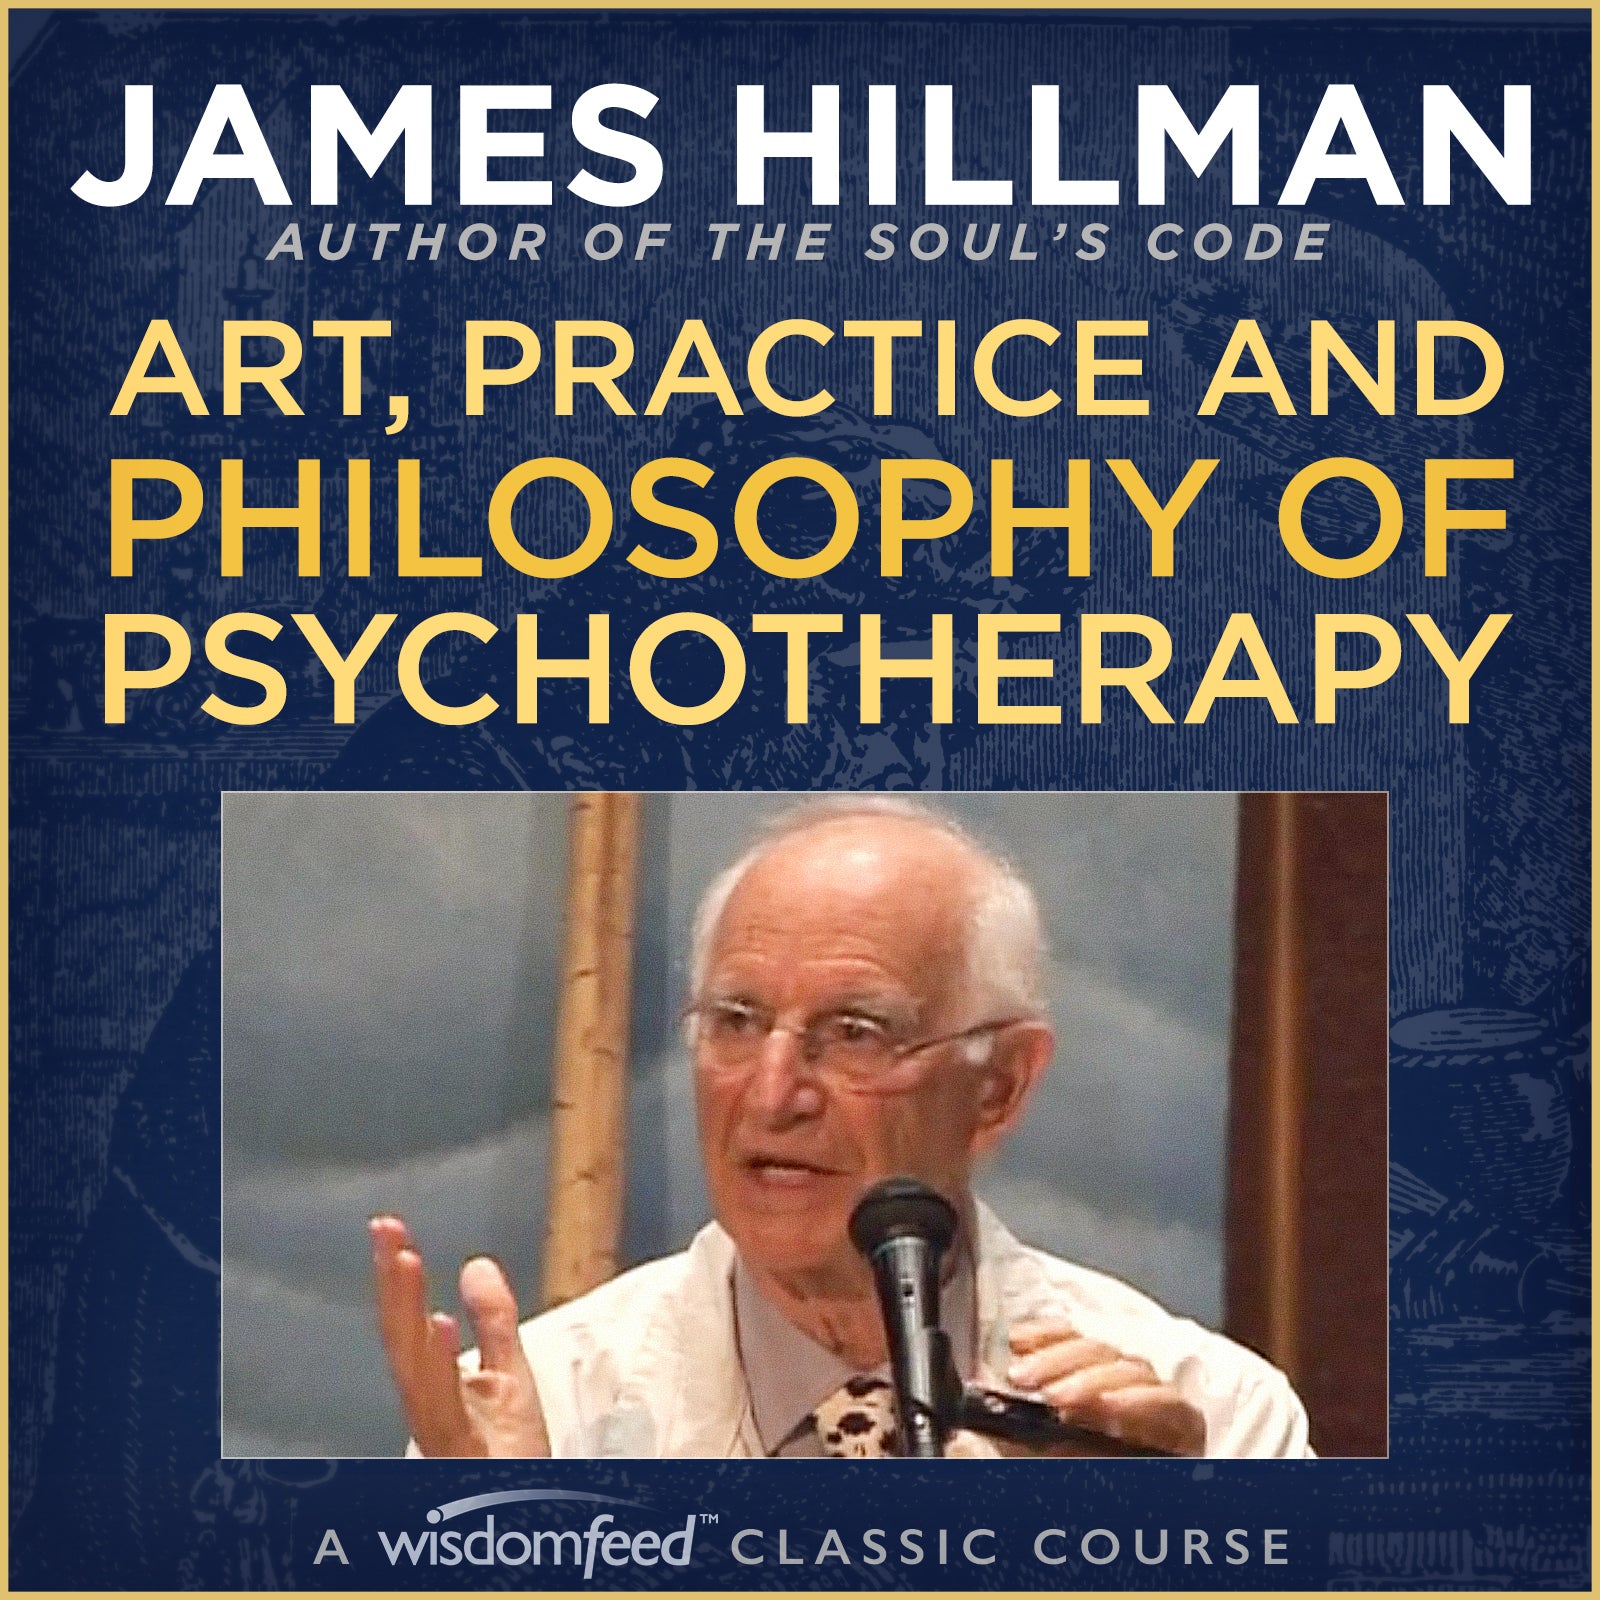 Art, Practice and Philosophy of Psychotherapy with James Hillman - Video and Audio